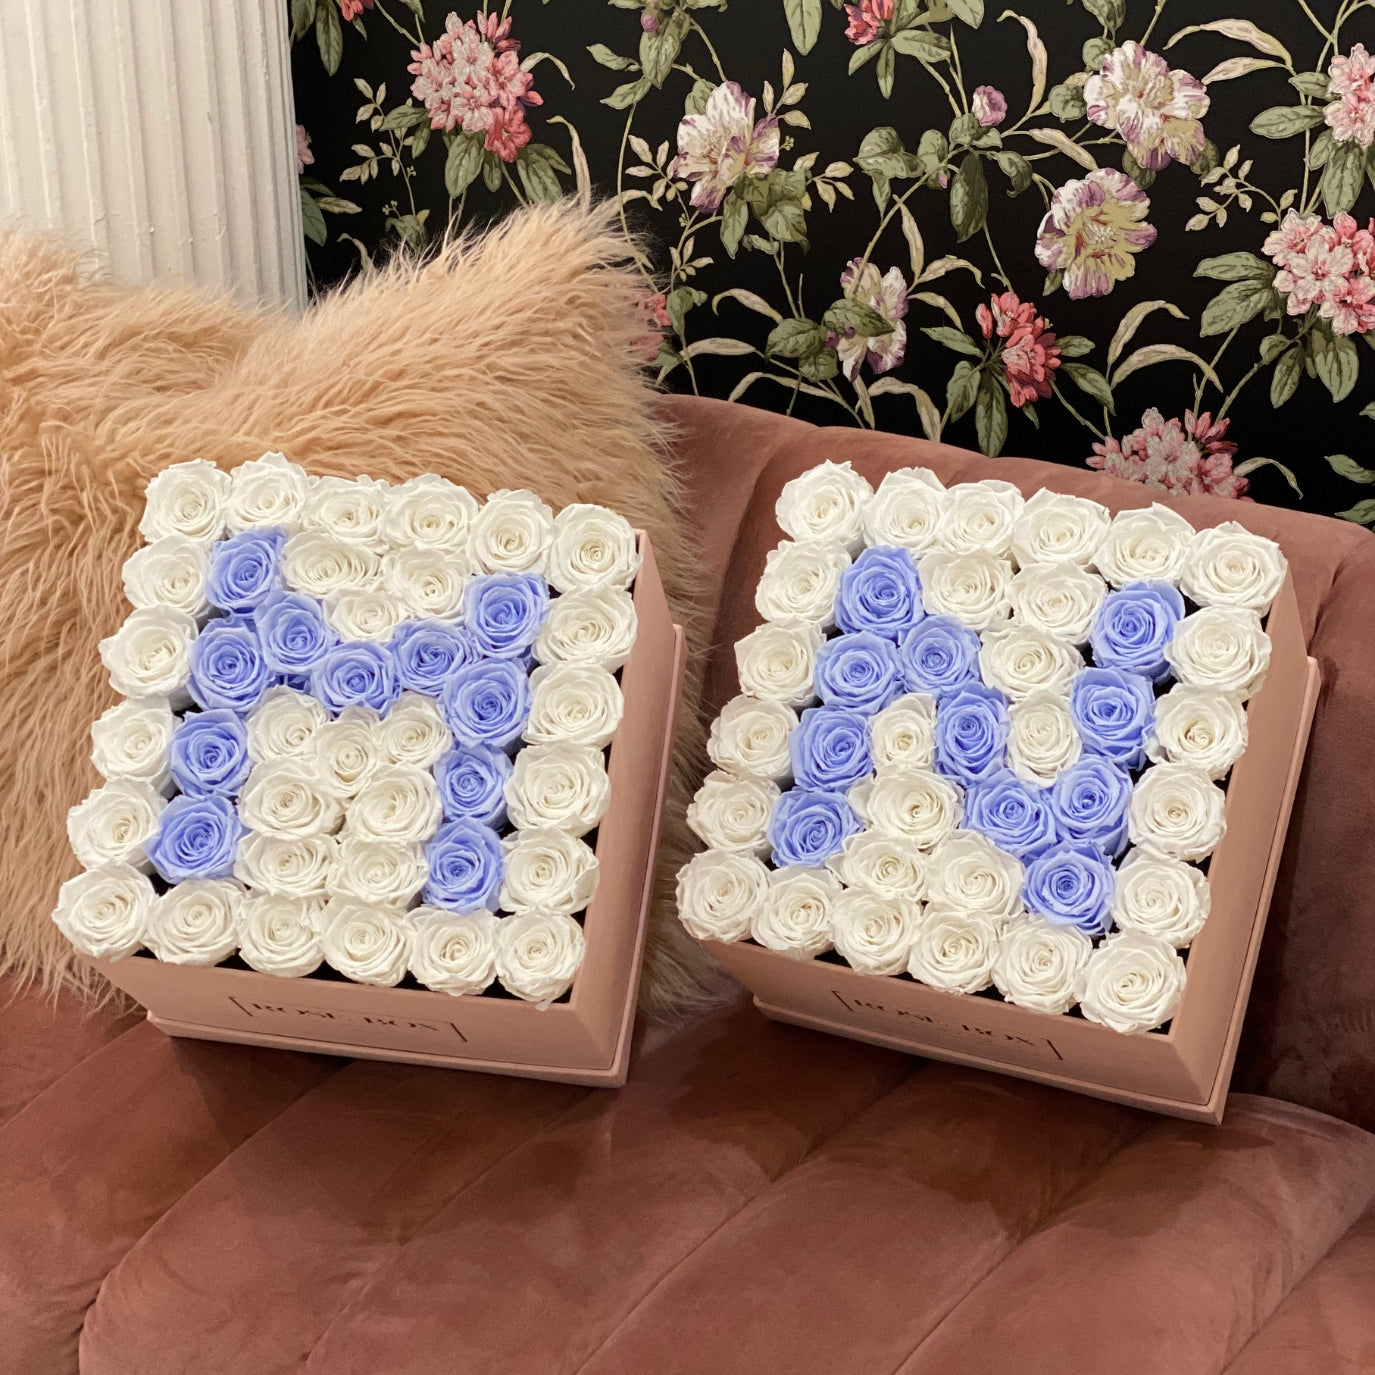 Large Square Pink Initial Box with Pure White & Violet Roses